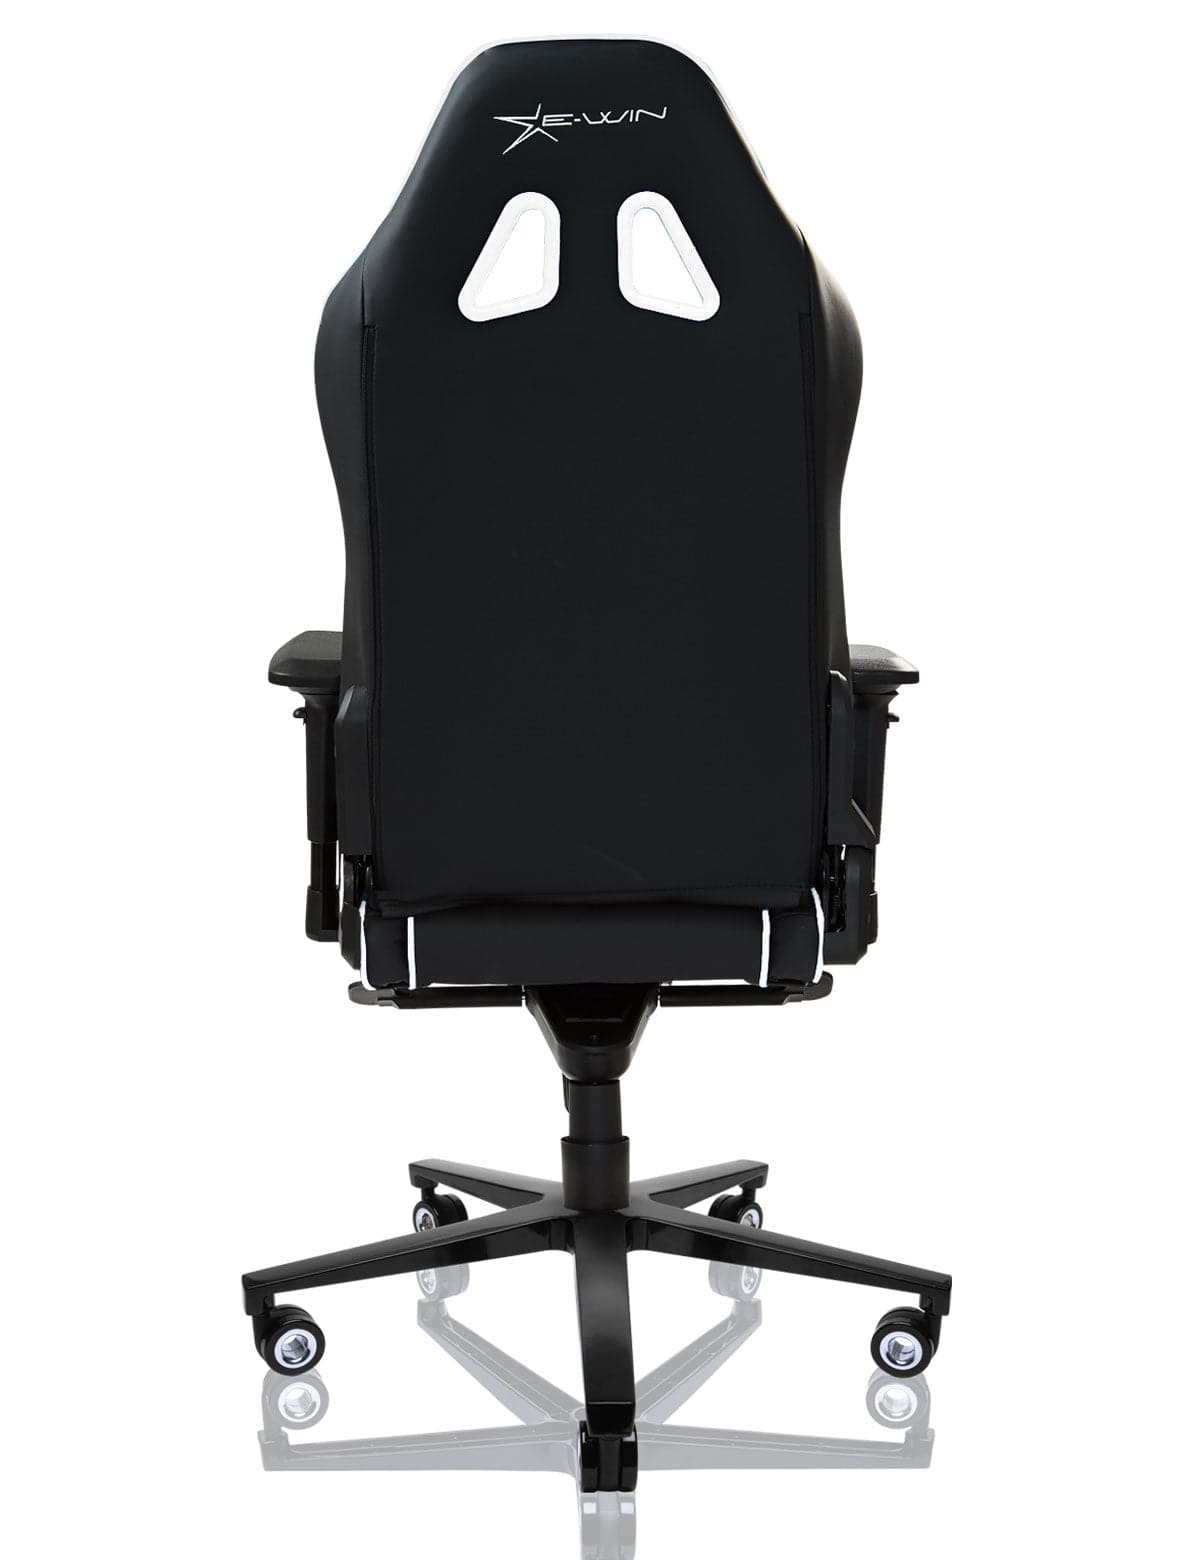 E-WIN Champion Series Ergonomic Computer Gaming Office Chair with Pillows - CPB